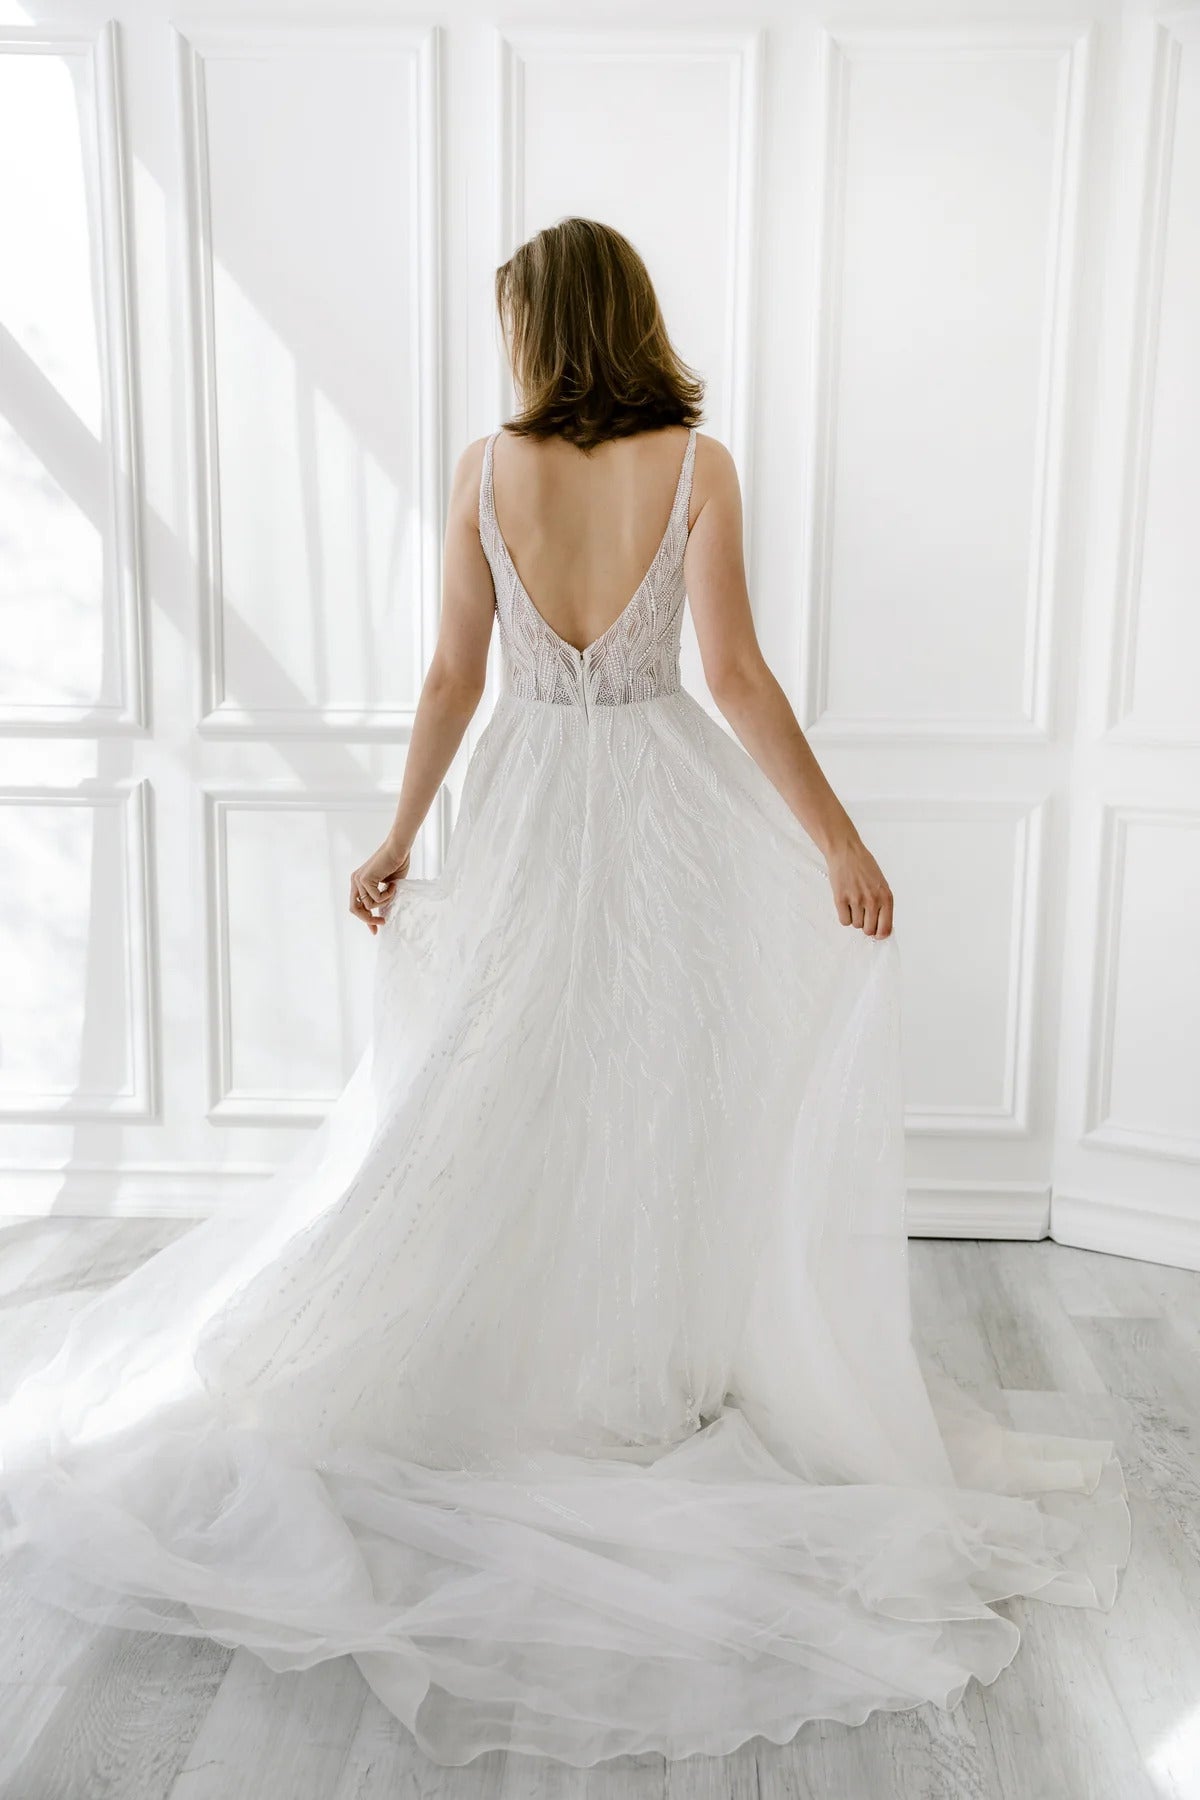 Pearl Embellished A-Line Gown by Enaura Bridal - Image 2